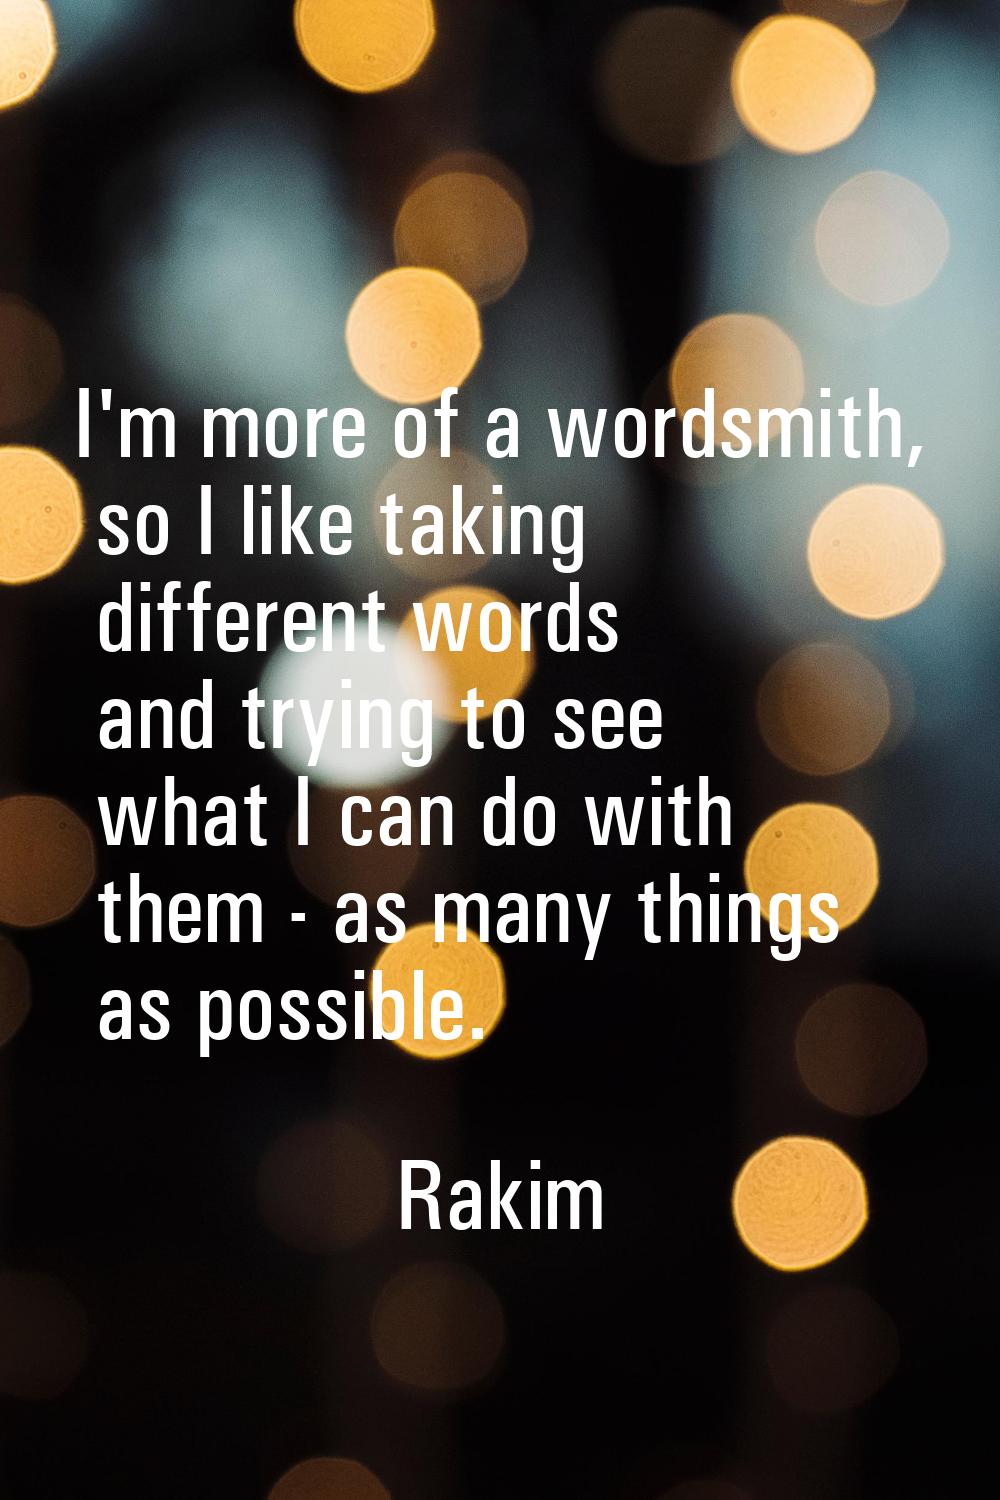 I'm more of a wordsmith, so I like taking different words and trying to see what I can do with them